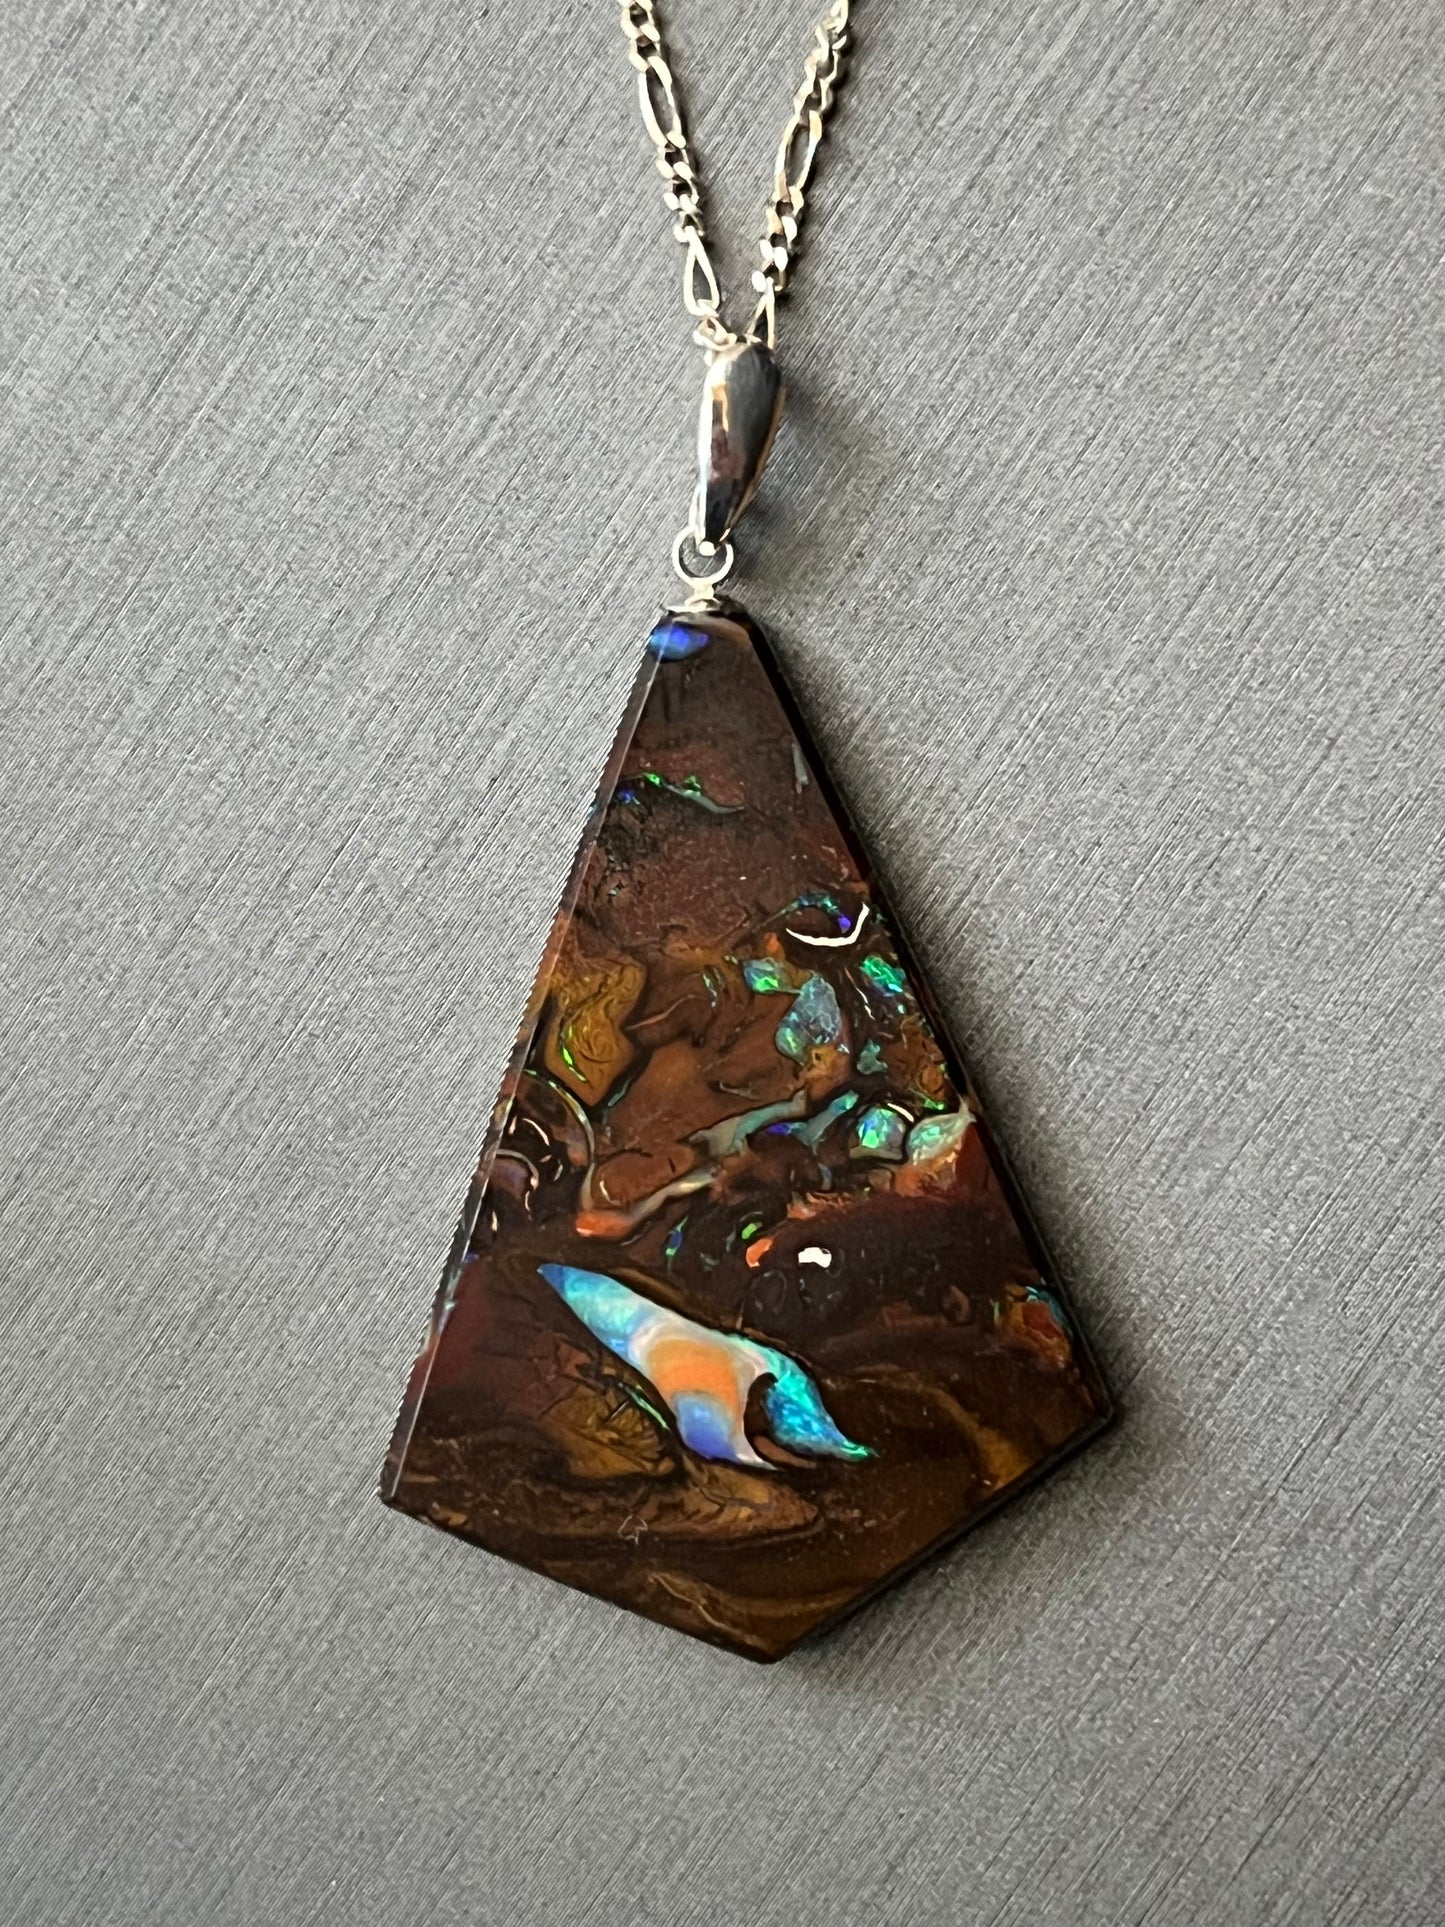 Australian Korite Opal pendant on silver, cut to maximize the beauty of the veins. This unique piece of jewelry is authentic Alaska Native art created by an enrolled member of an Alaska Native tribe. Certified Silver Hand and Made in Alaska jewelry.